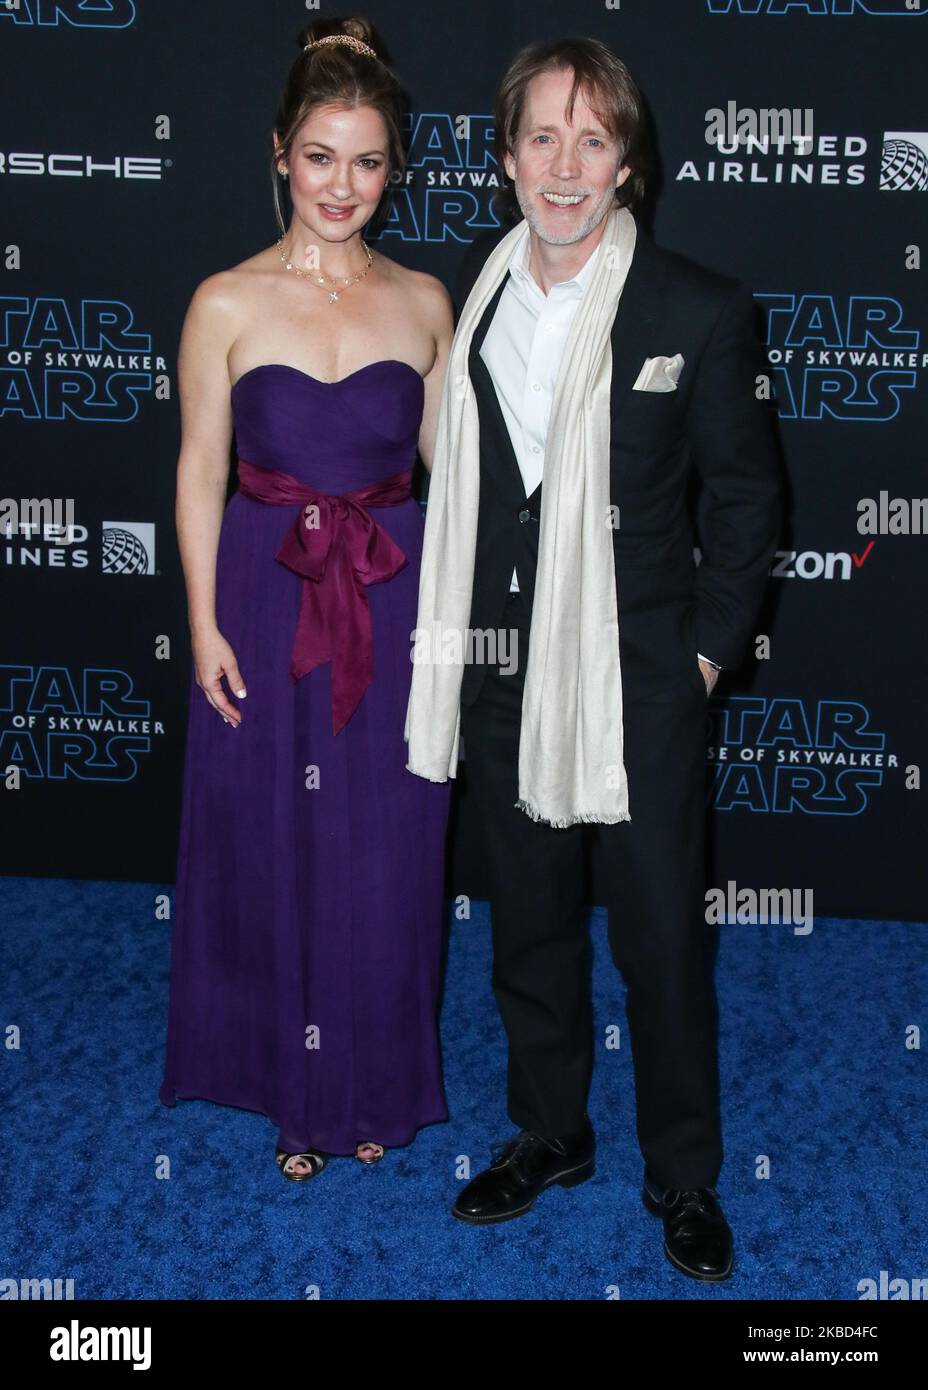 HOLLYWOOD, LOS ANGELES, CALIFORNIA, USA - DECEMBER 16: Catherine Taber and James Arnold Taylor arrive at the World Premiere Of Disney's 'Star Wars: The Rise Of Skywalker' held at the El Capitan Theatre on December 16, 2019 in Hollywood, Los Angeles, California, United States. (Photo by Xavier Collin/Image Press Agency/NurPhoto) Stock Photo